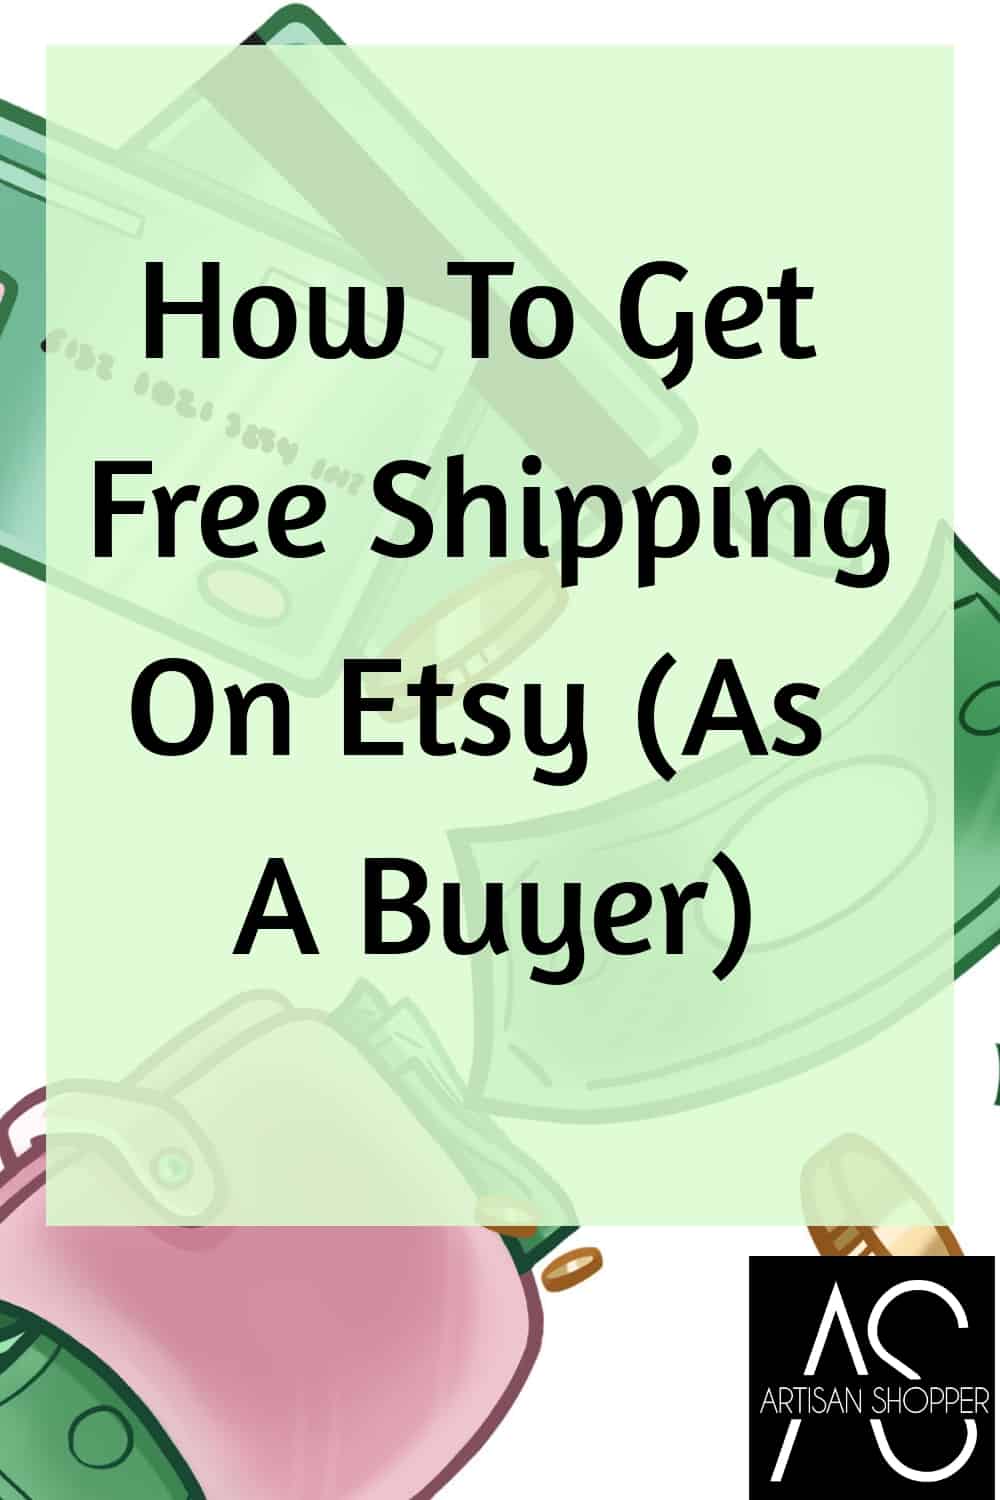 how-to-get-free-shipping-on-etsy-as-a-buyer-artisan-shopper